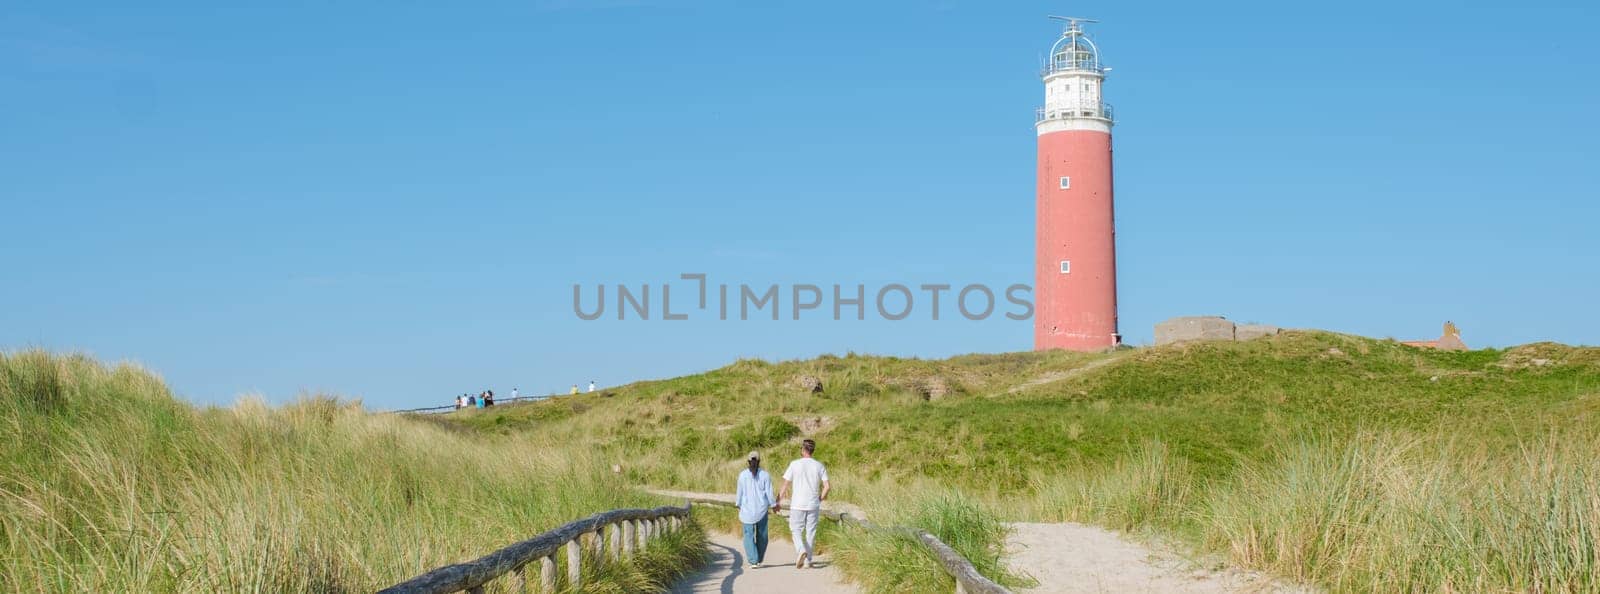 Two people walk down a path next to a towering lighthouse in Texel, Netherlands, with waves crashing against the shore in the background by fokkebok